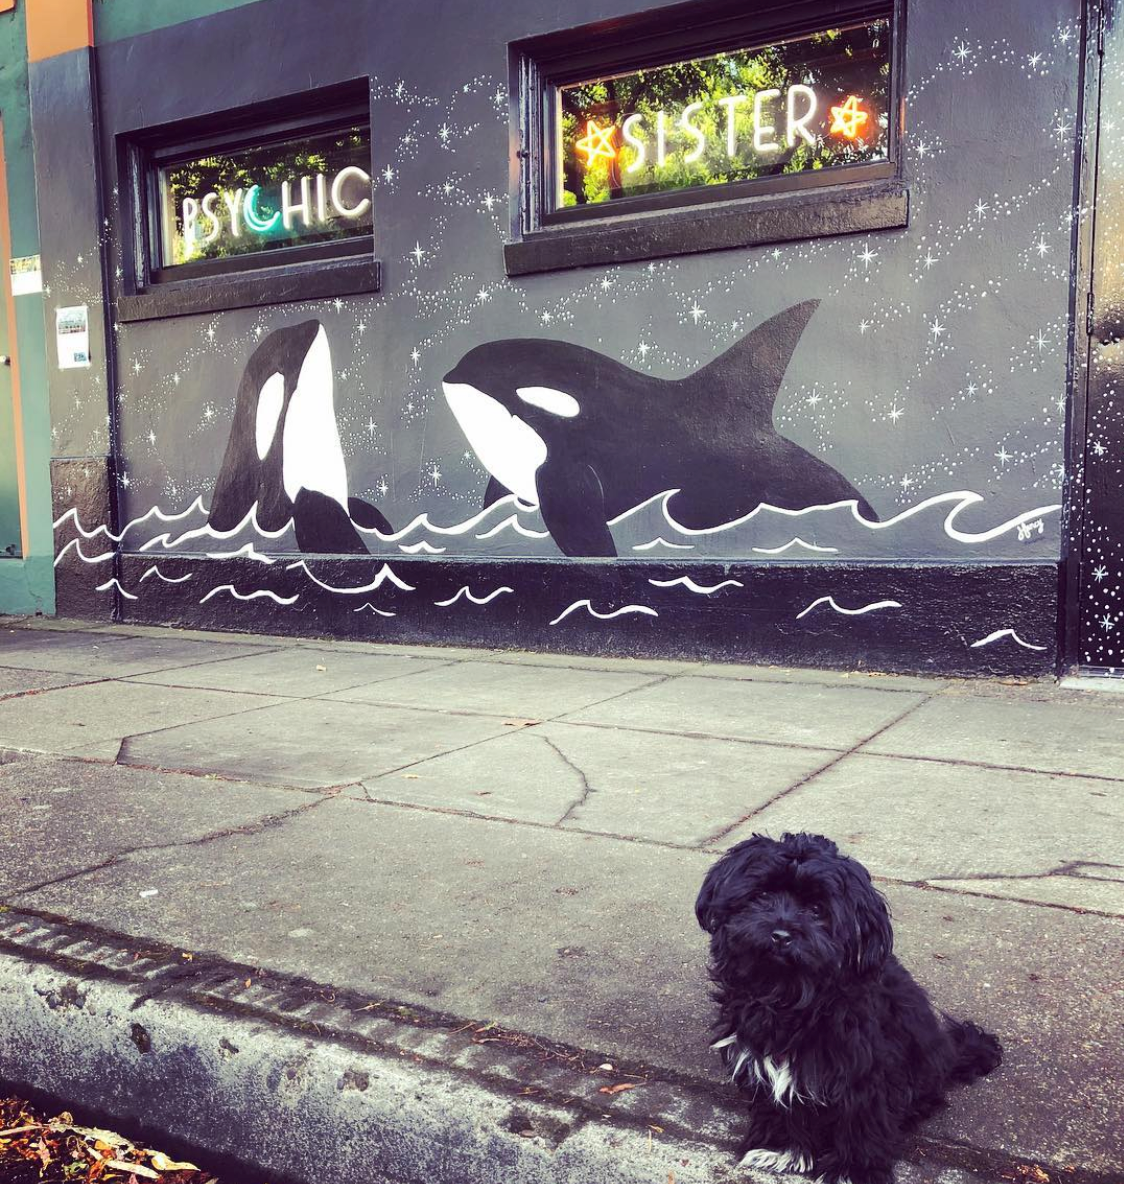 Exterior of Psychic Sister Portland, with orca mural and Purple Rain the dog.